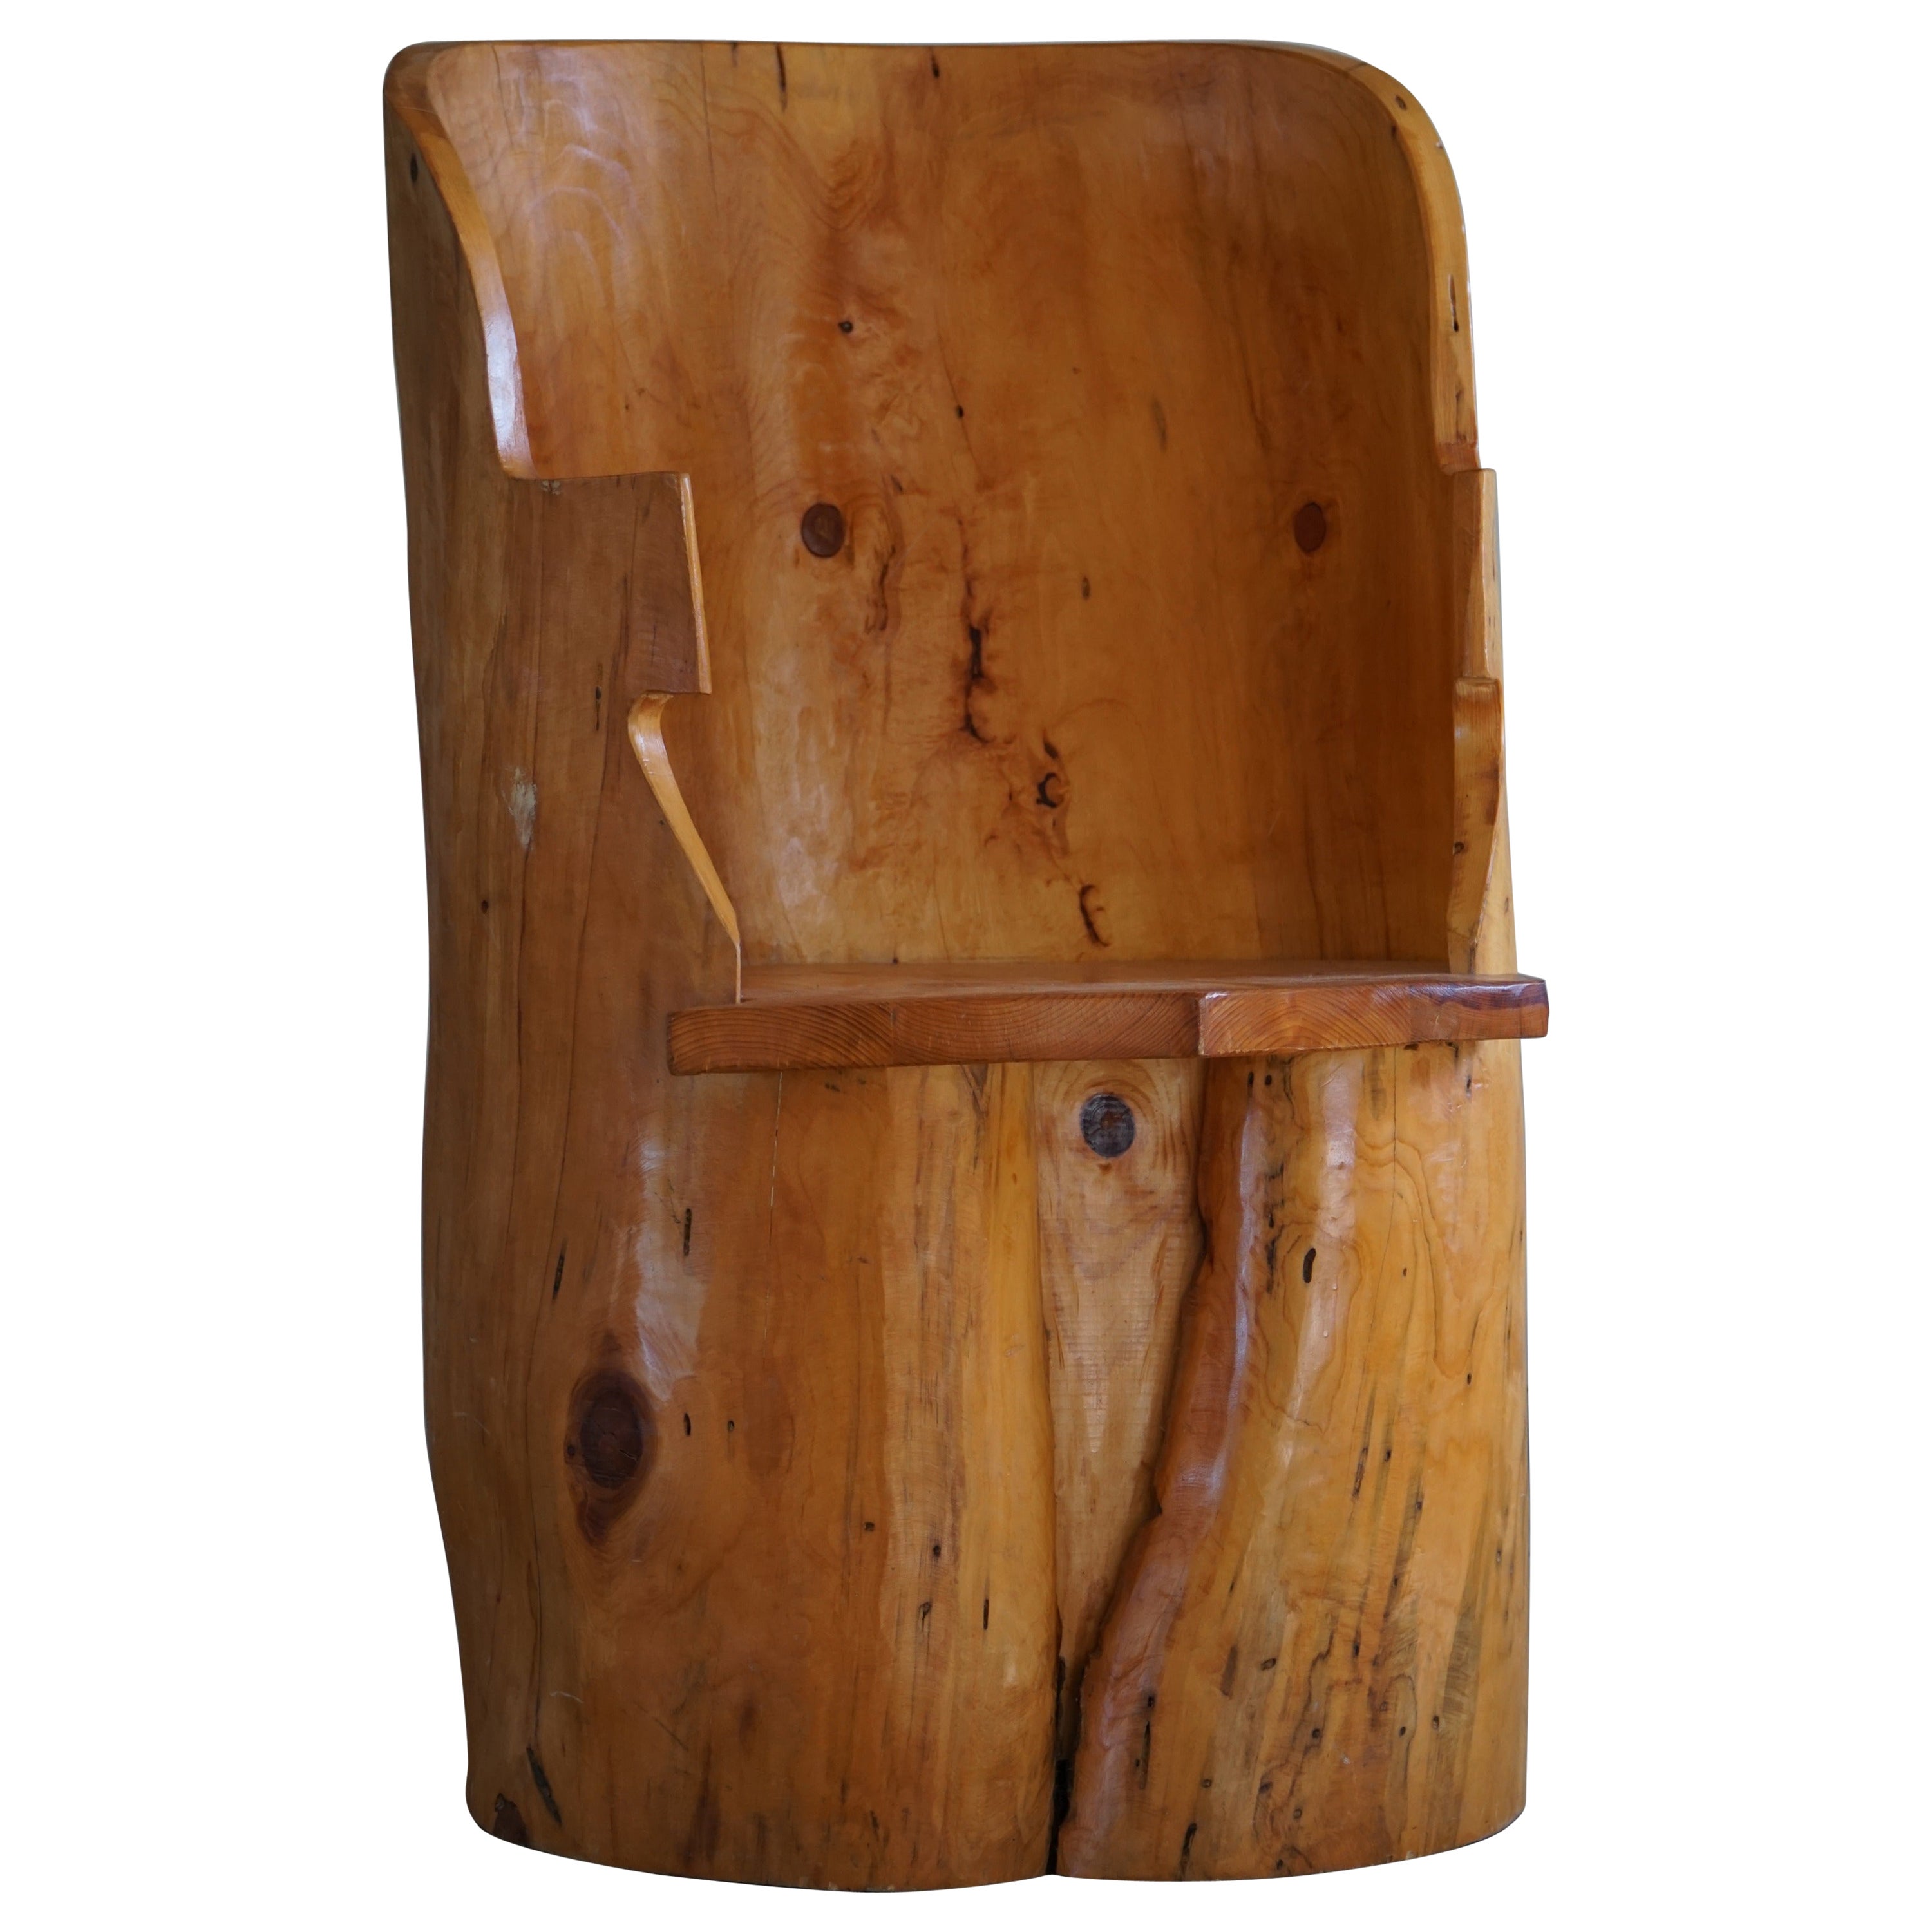 Stump Chair in Solid Birch by a Swedish Cabinetmaker, Wabi Sabi, 1950s For Sale